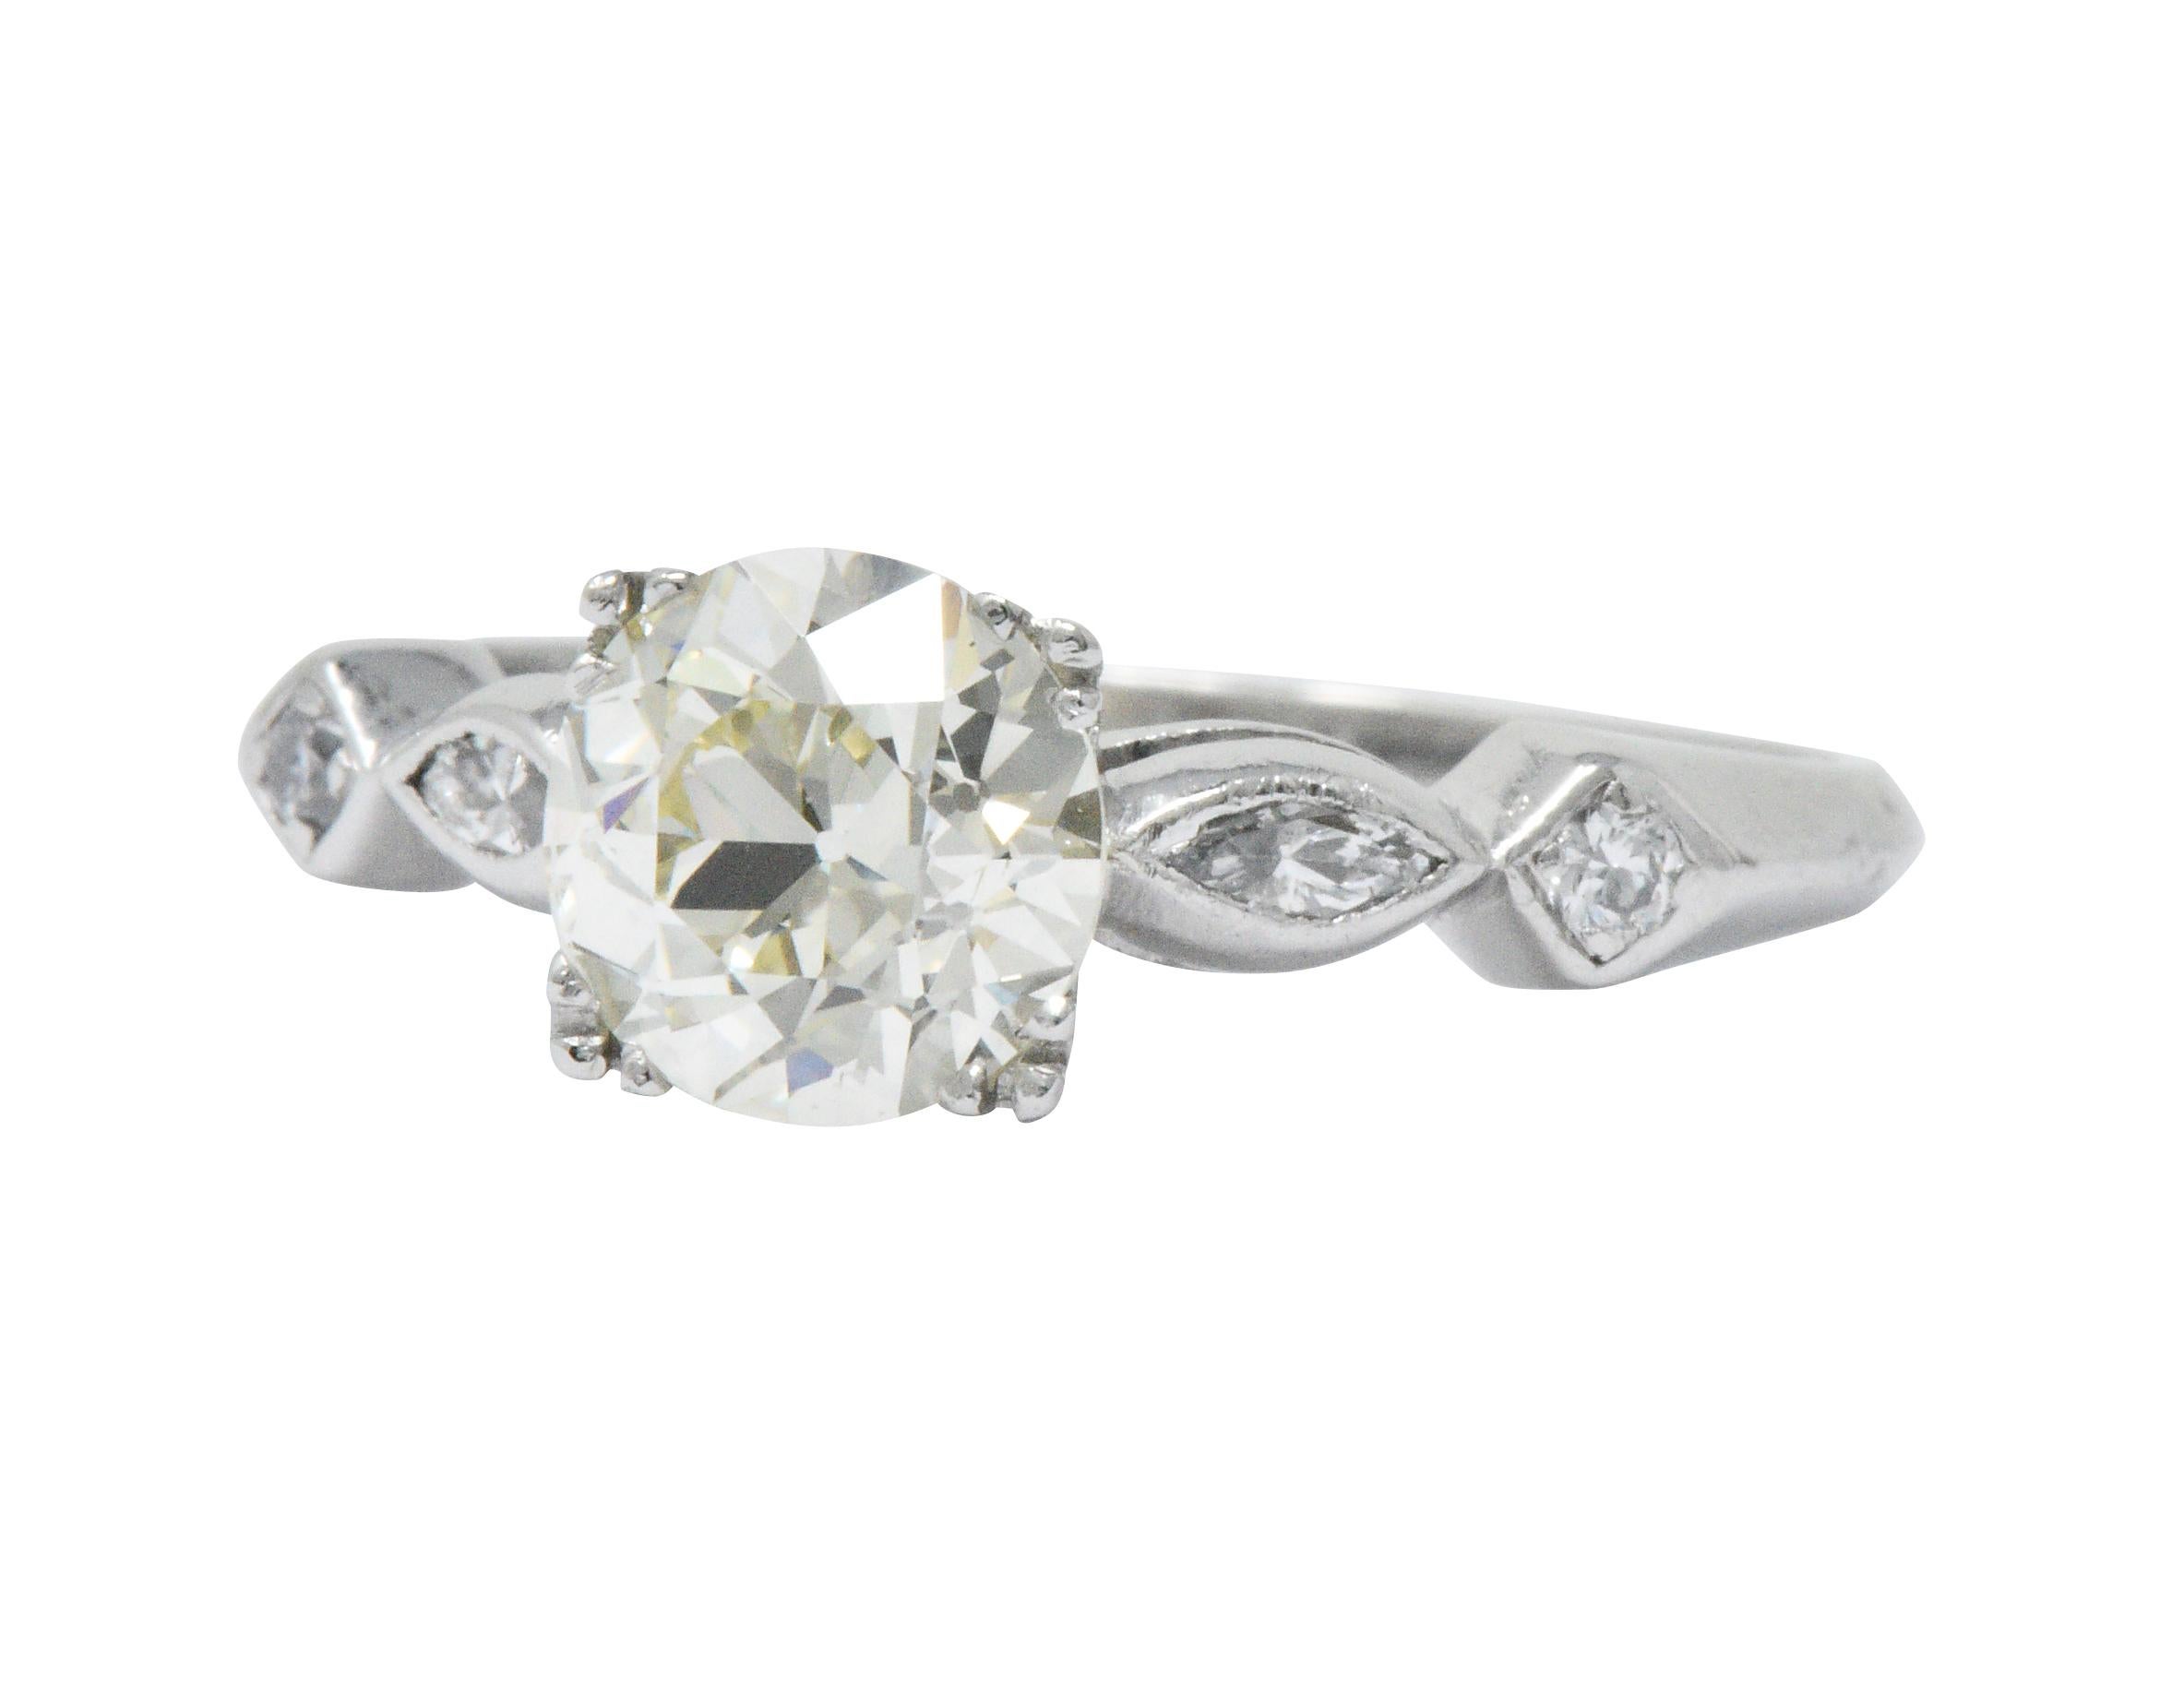 Centering a basket set old European cut diamond weighing 1.49 carats, N color with VS1 clarity

Set by decorative tri-bead prongs in a tapered geometric mounting featuring bezel set diamonds

With marquise and round brilliant cut diamonds weighing